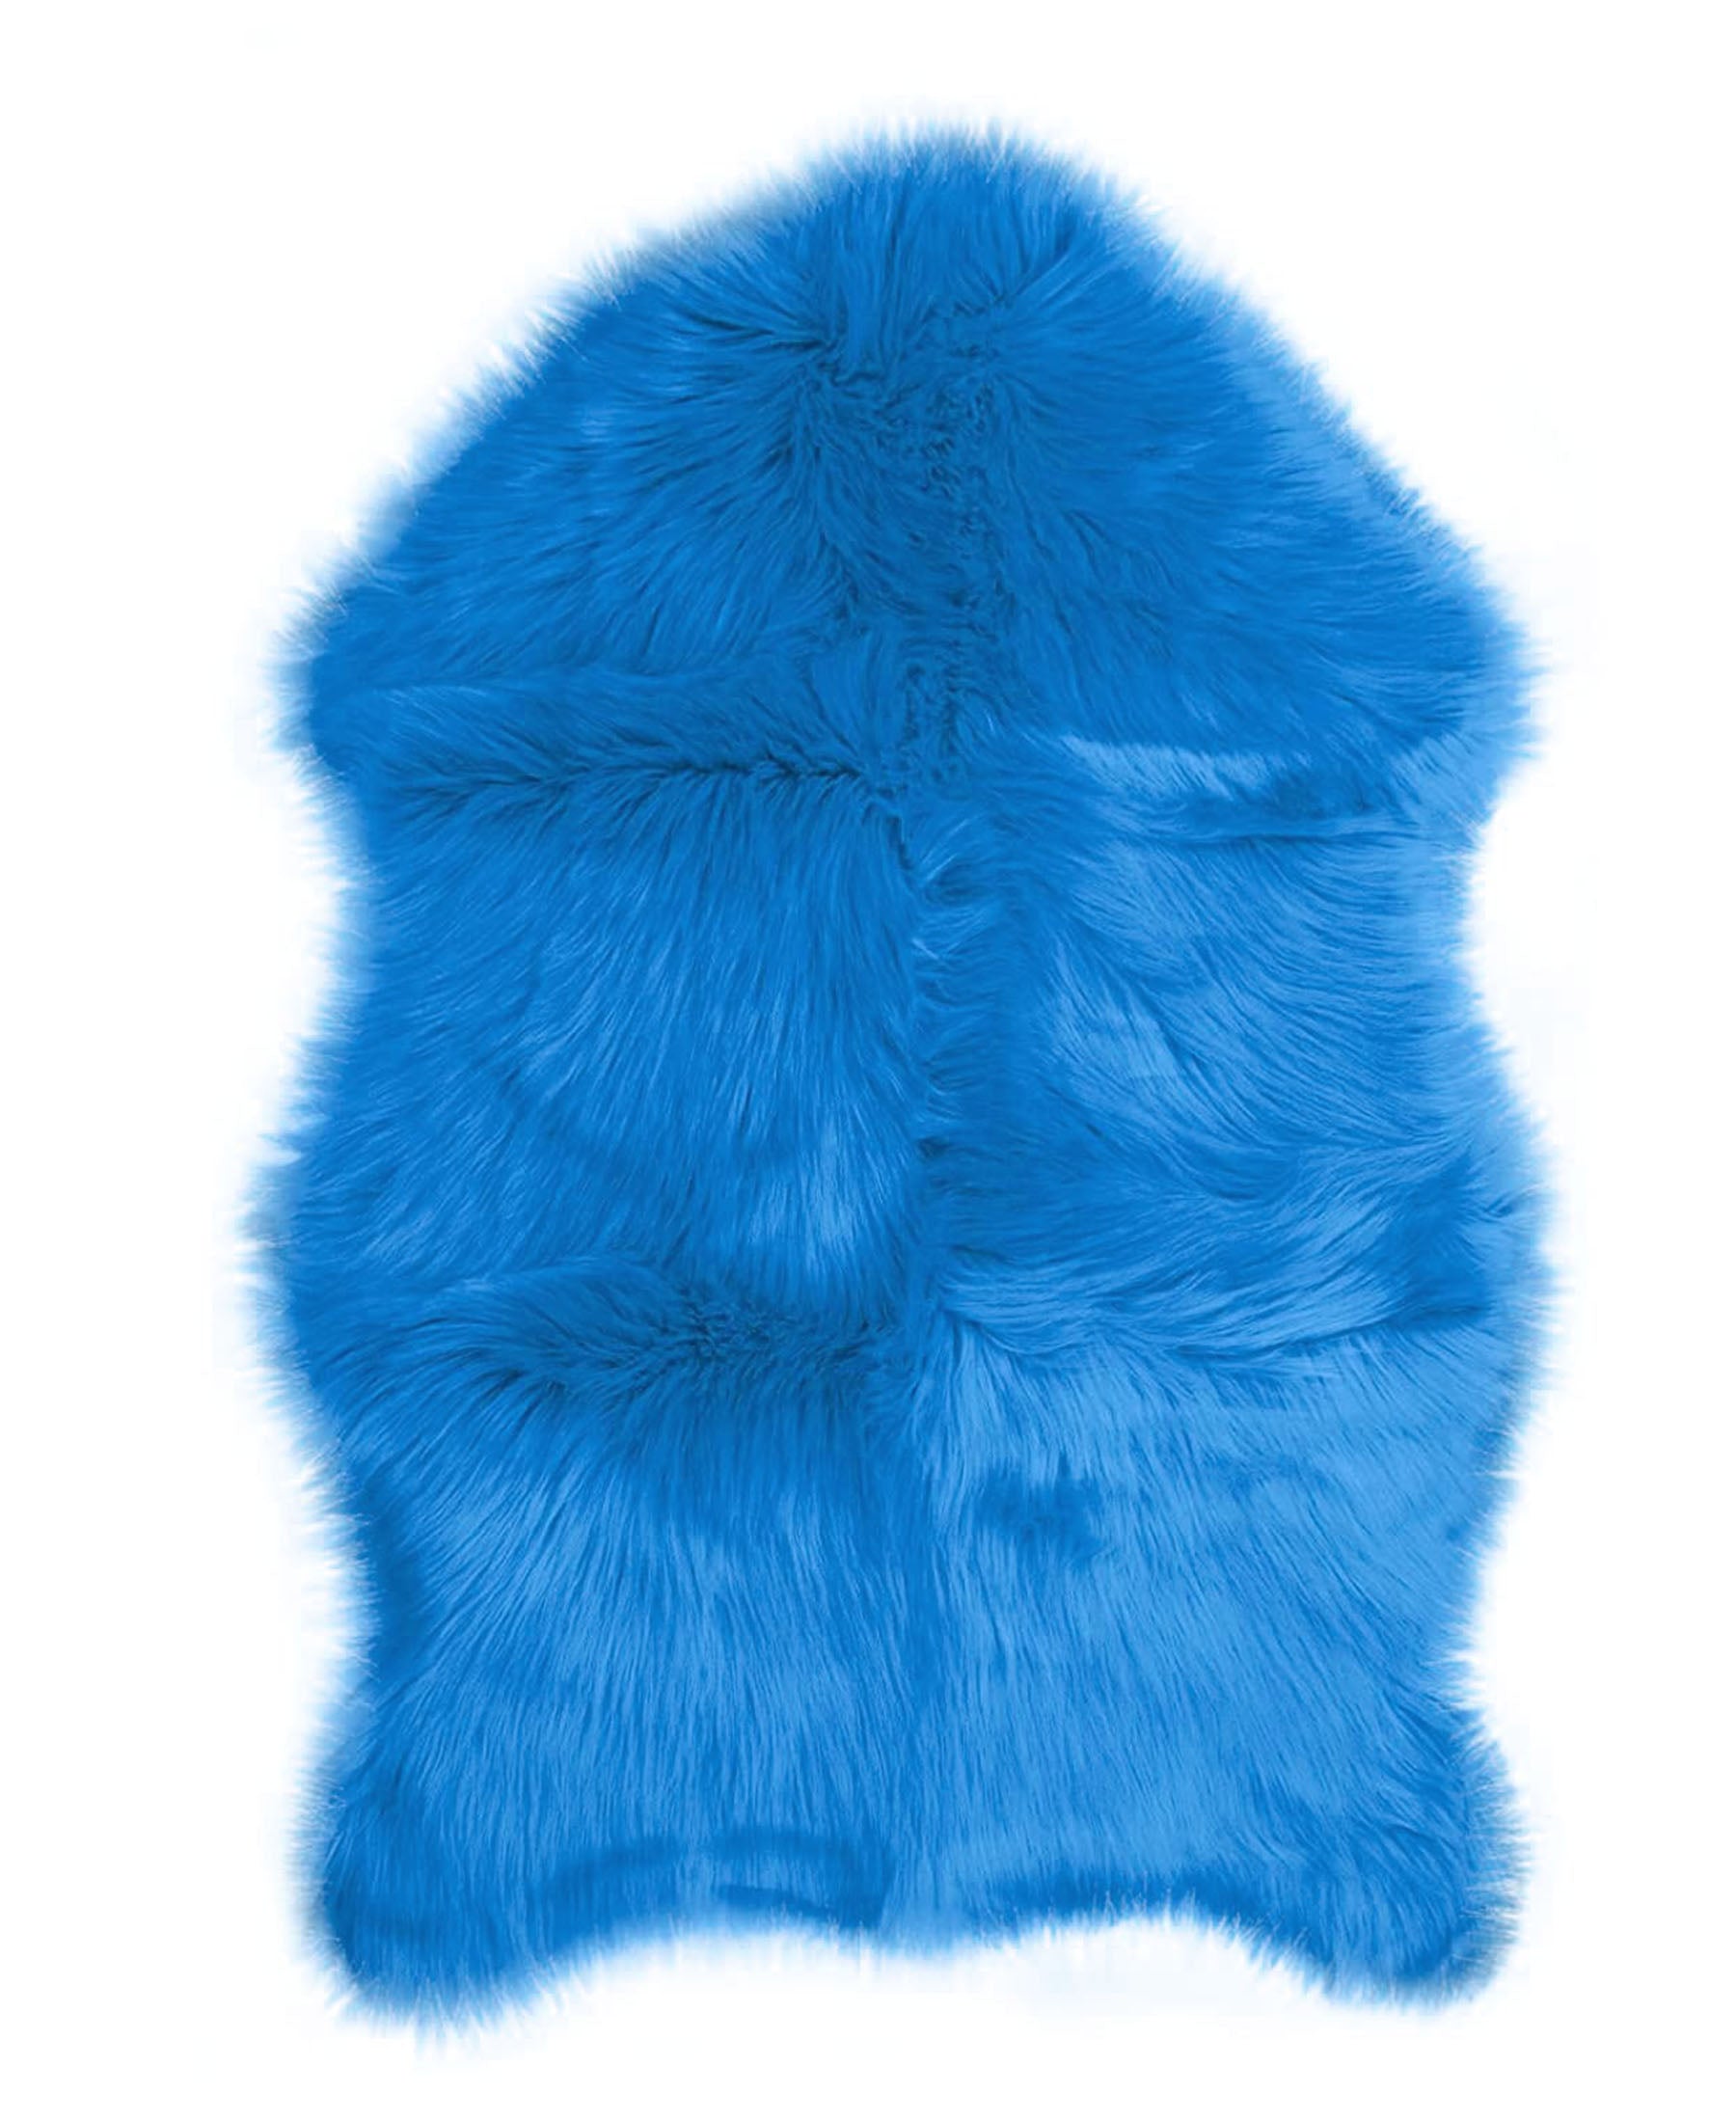 Shaggy Faux Fur Luxurious Shaped 600mm x 900mm - Teal